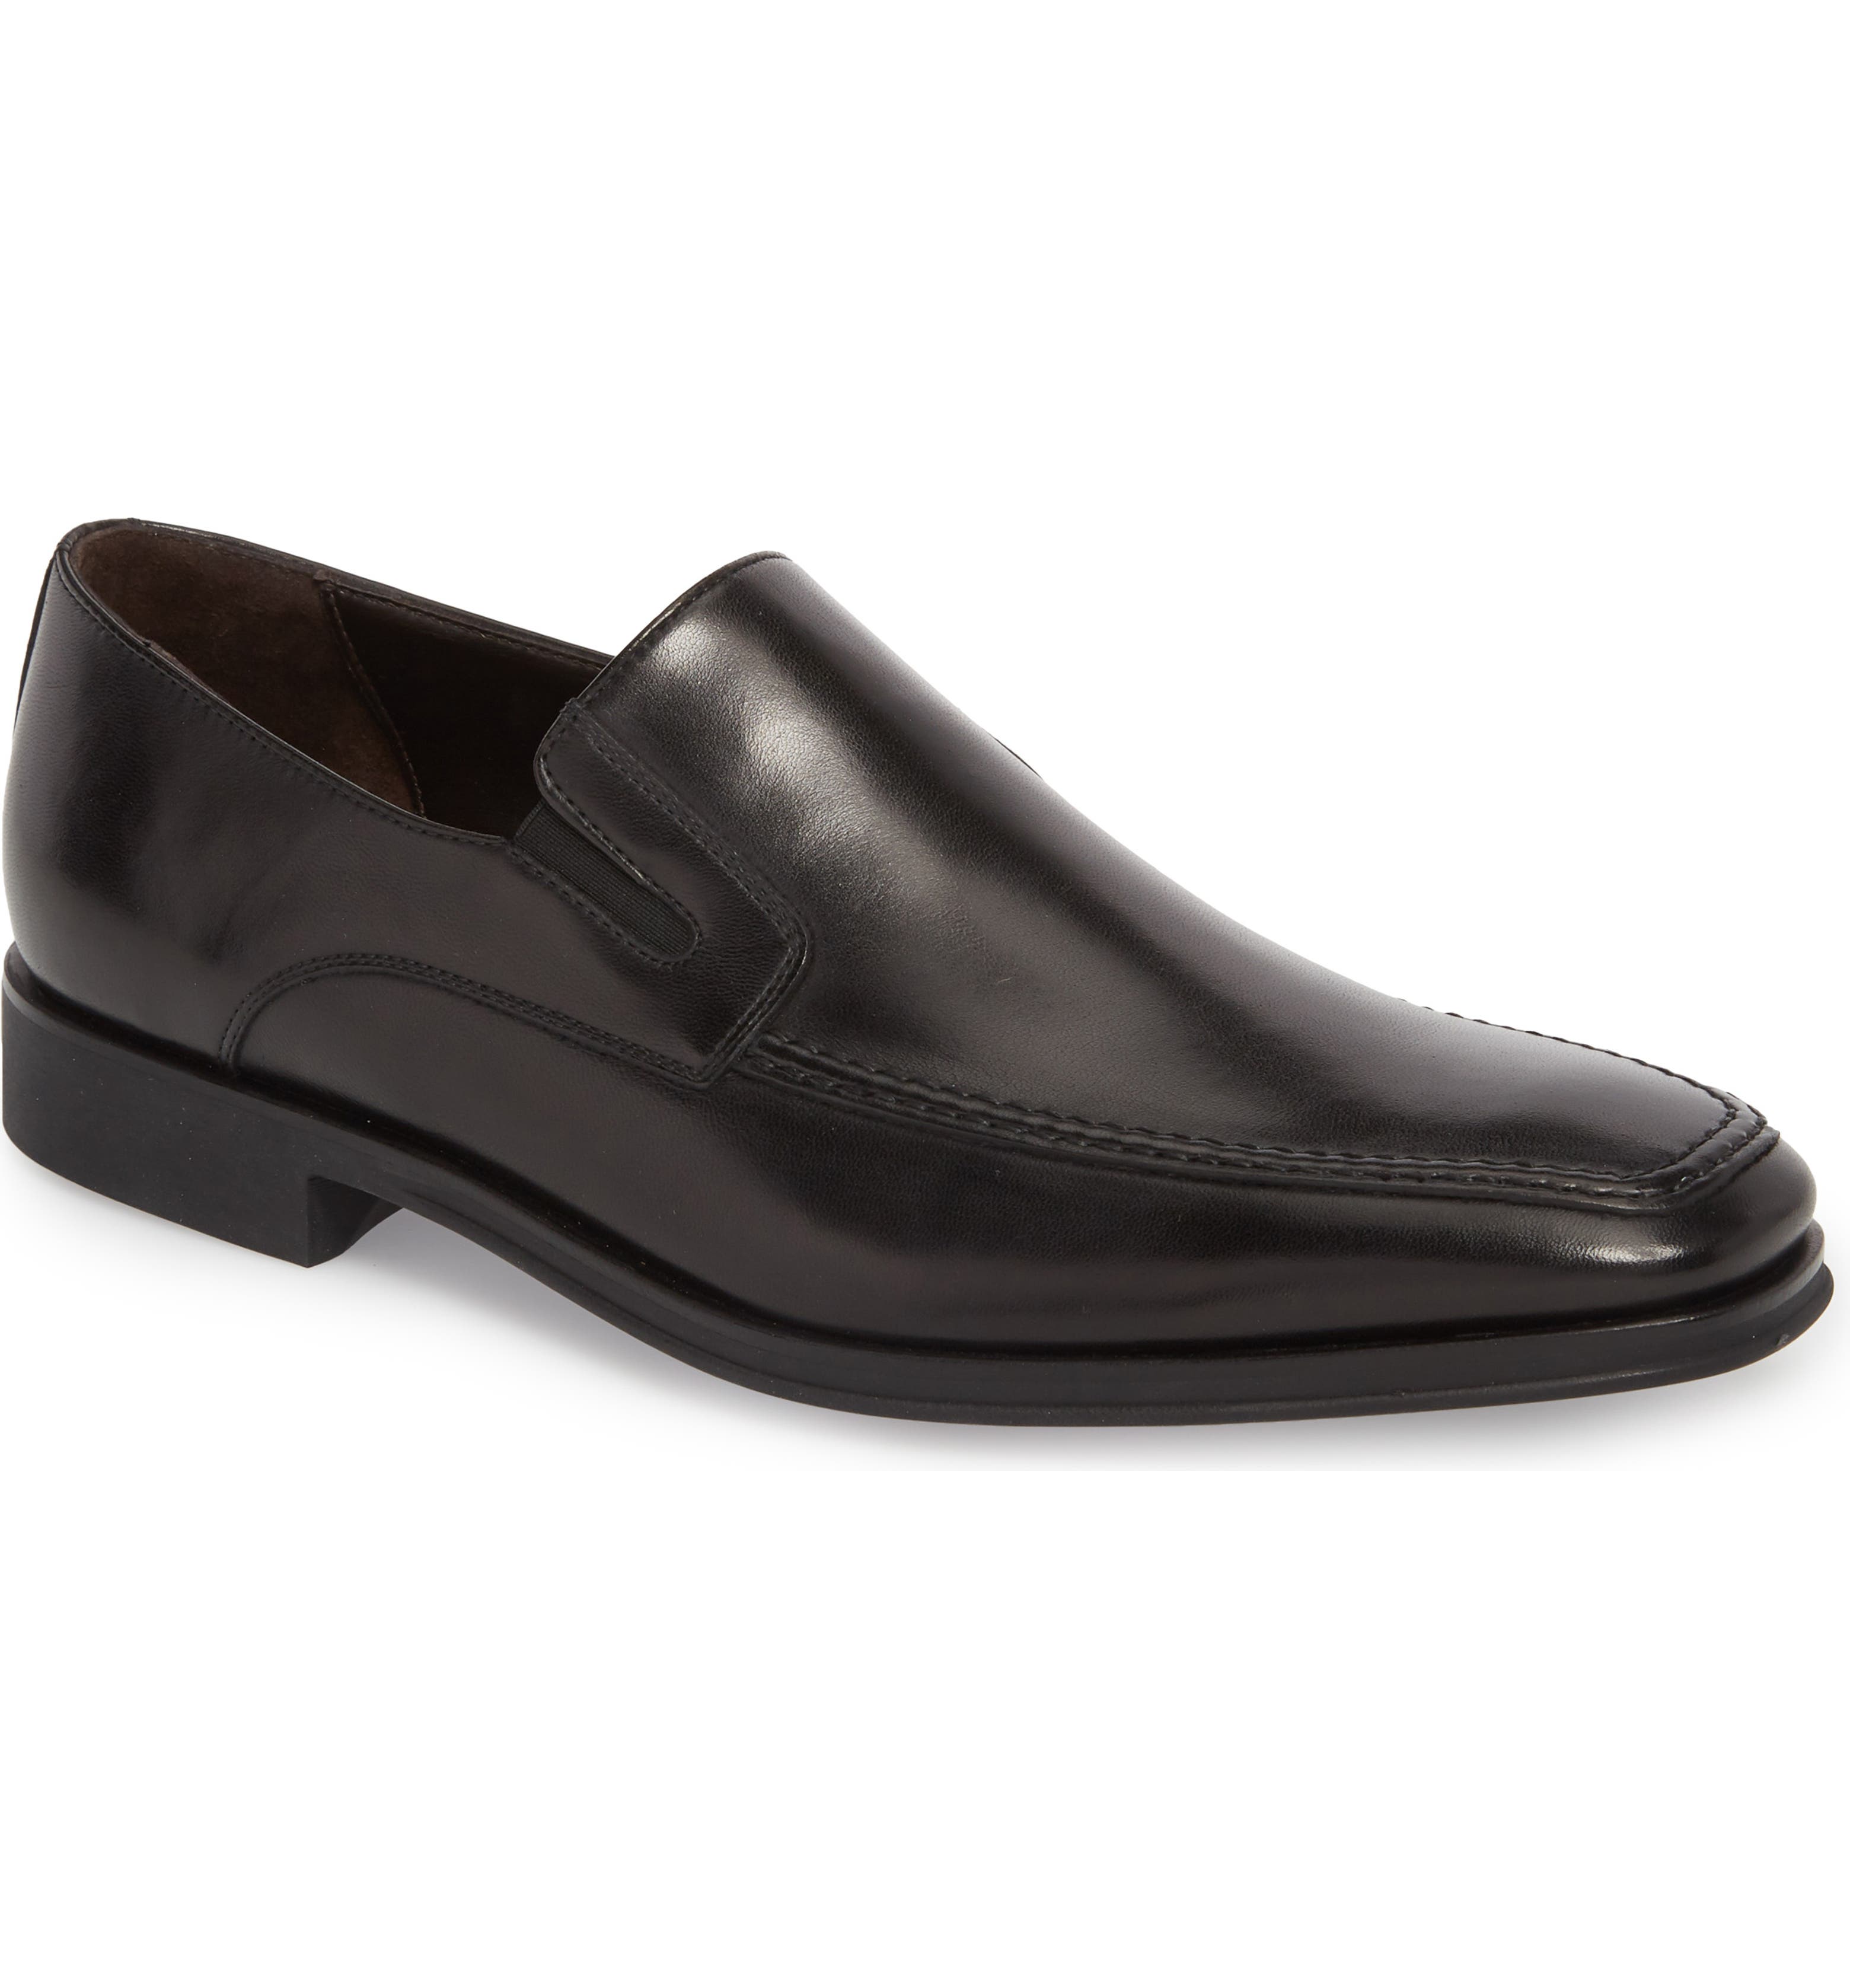 Monte Rosso Lucca Nappa Leather Loafer (Men) | Nordstrom